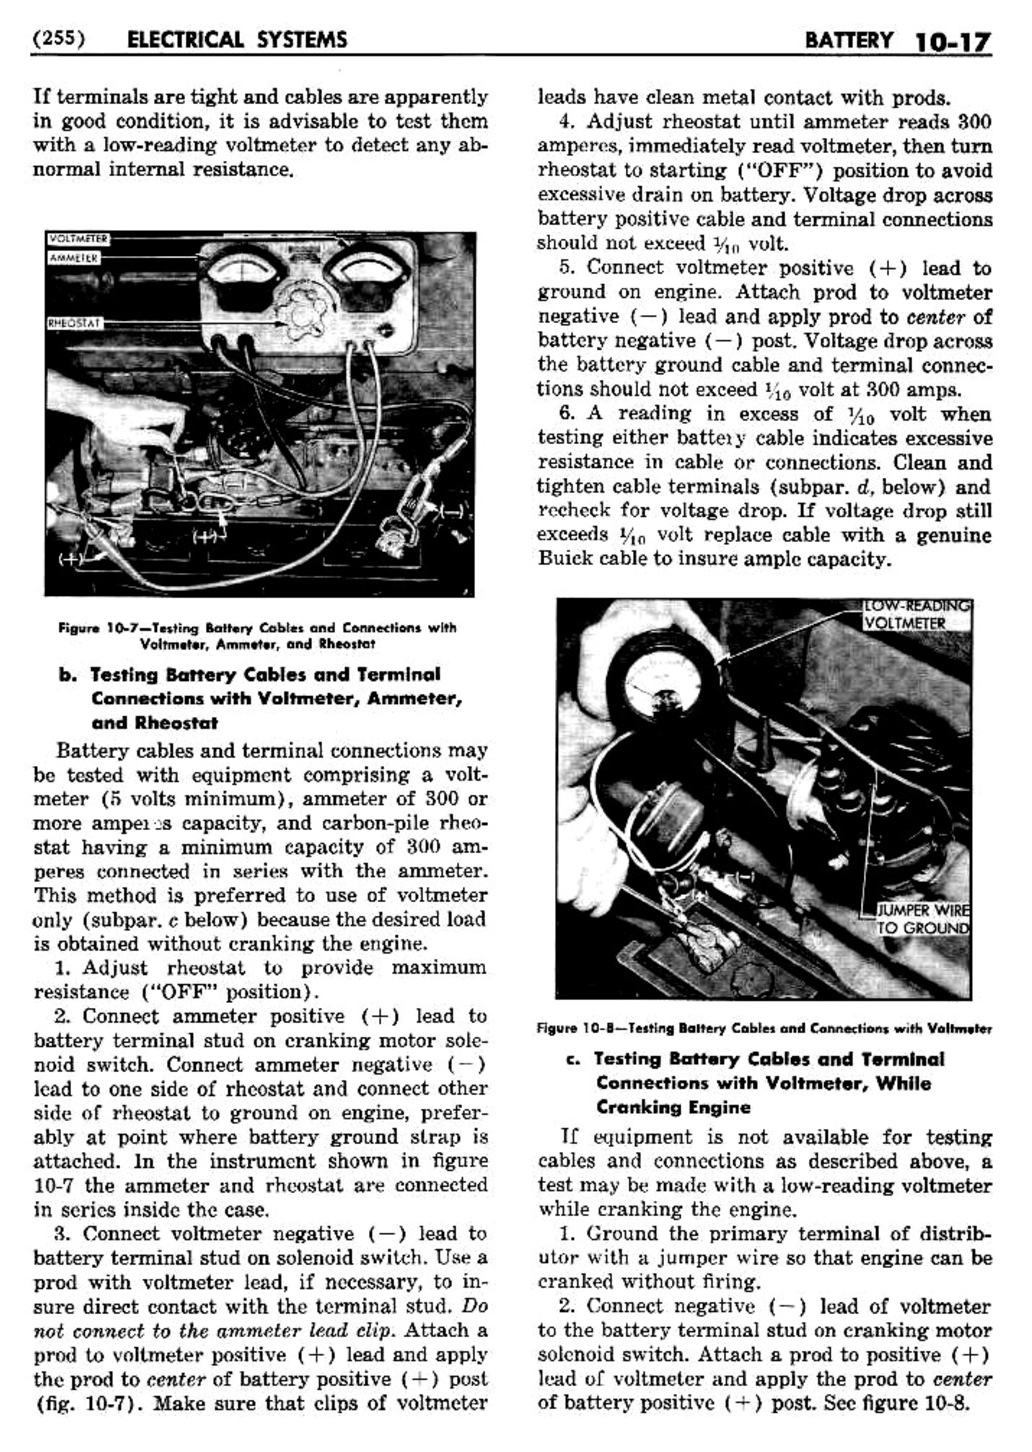 n_11 1950 Buick Shop Manual - Electrical Systems-017-017.jpg